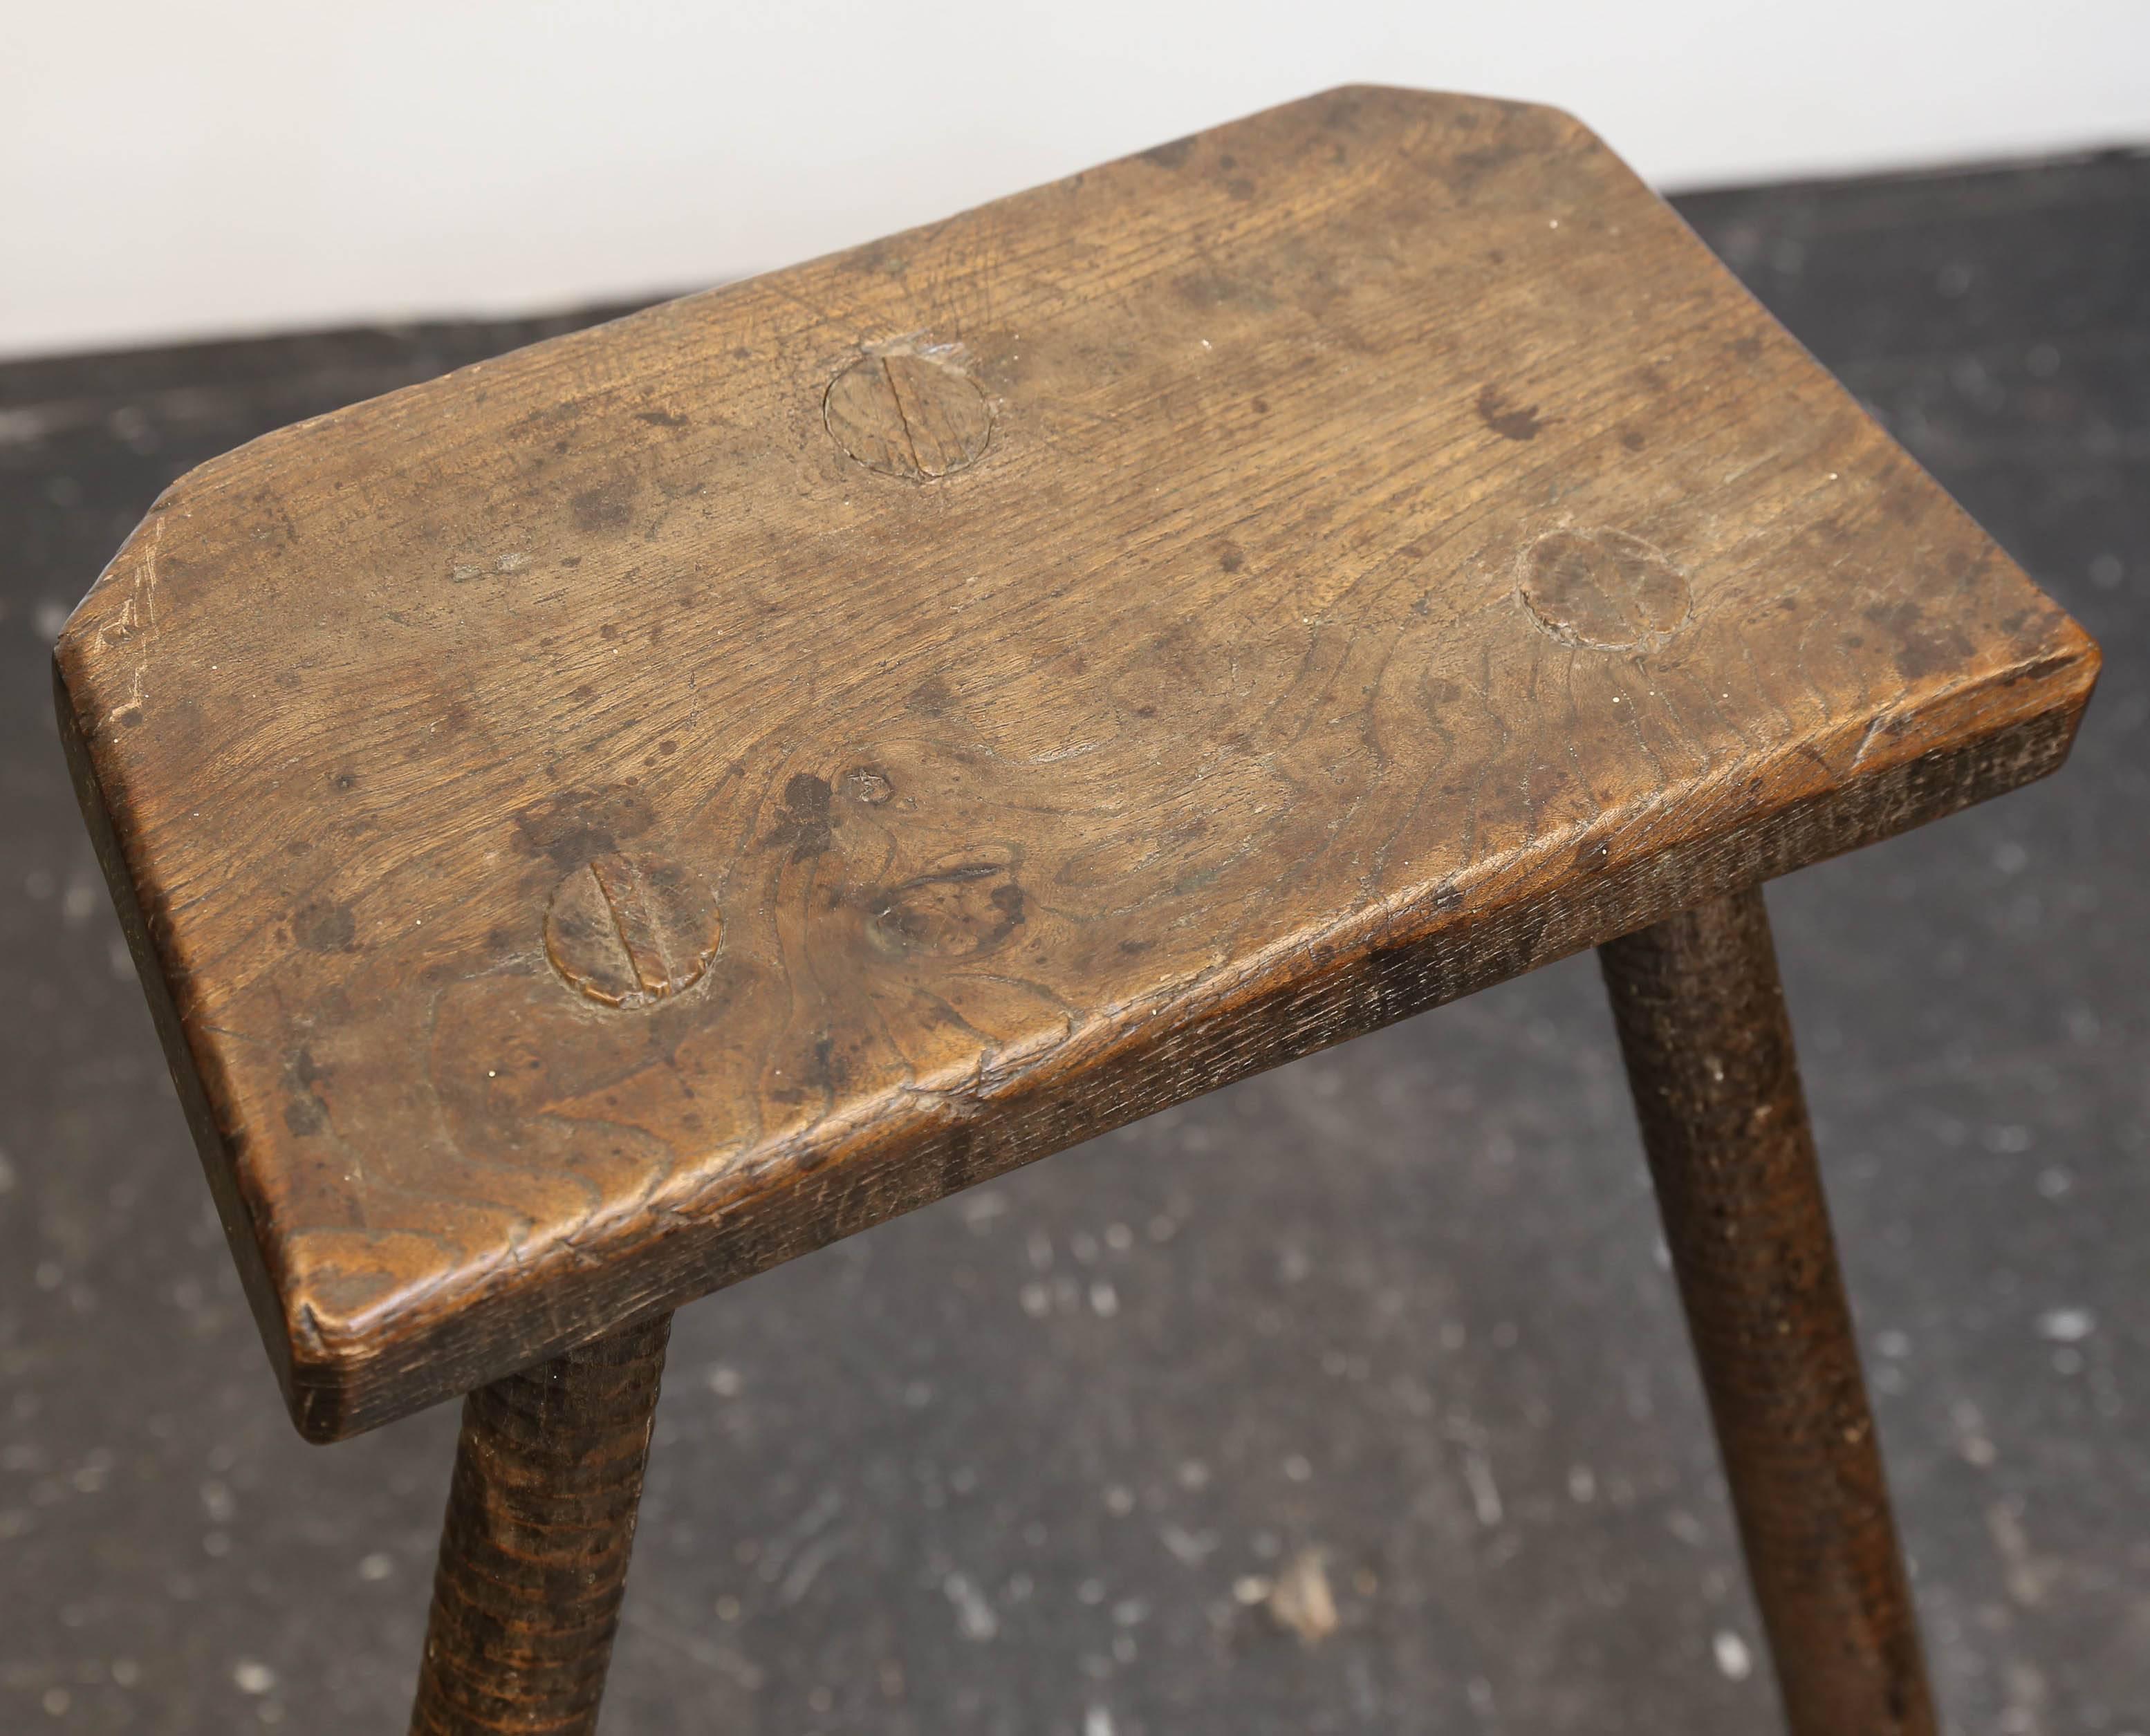 Early 19th century English cutler's stool used by workmen in the Sheffield Cutlery Company. Legs have ribbed detail. Beautiful patina. Would make a wonderful Primitive side table.